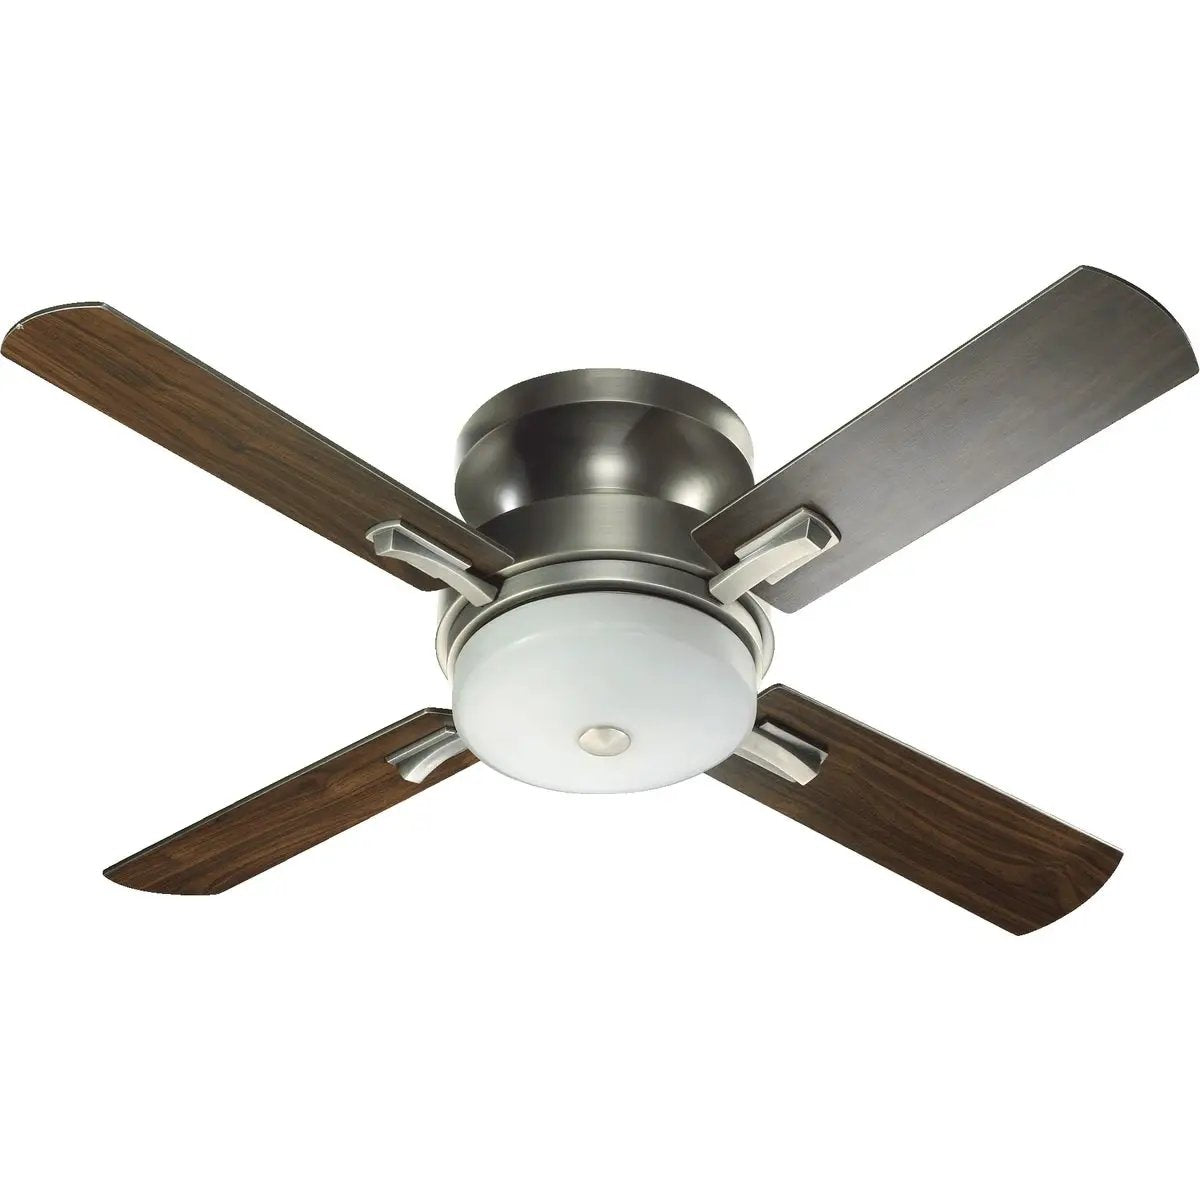 A Quorum International Flush Mount Ceiling Fan with Light, featuring slightly curved blades and inconspicuous housing. This indoor mechanical fan has a 52" sweep and includes a light kit with 3 LED lamps. UL Listed for dry locations. Limited Lifetime warranty.